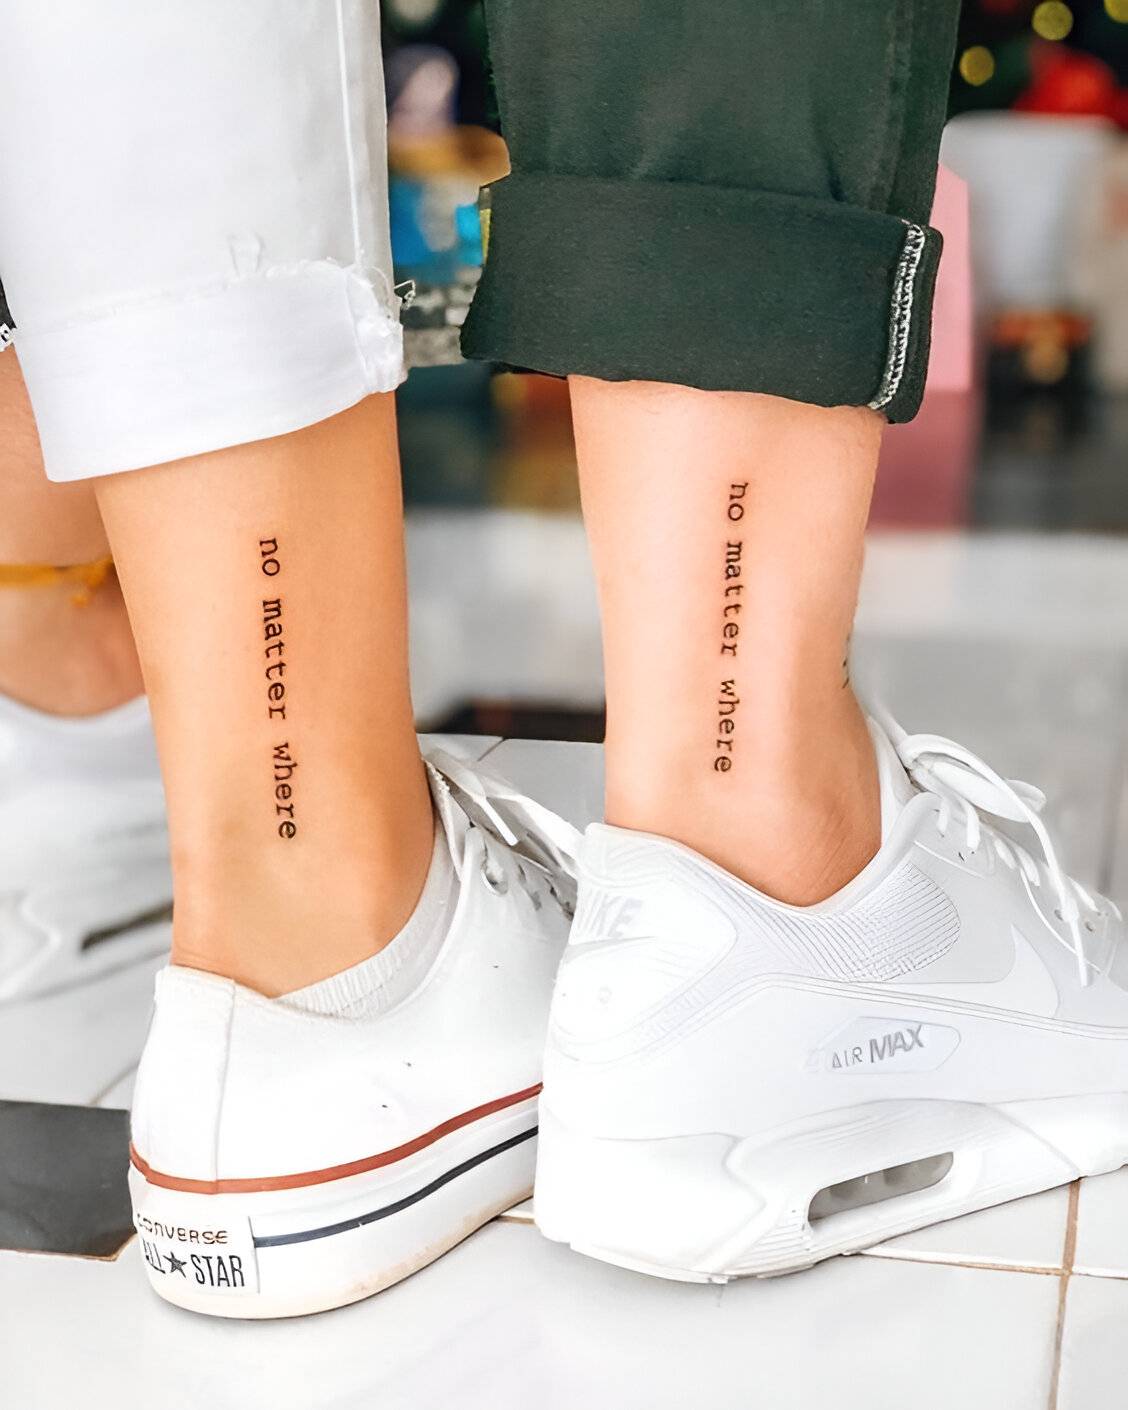 27 Feminine Best Friend Tattoos With The Perfect Elegant Touch 20